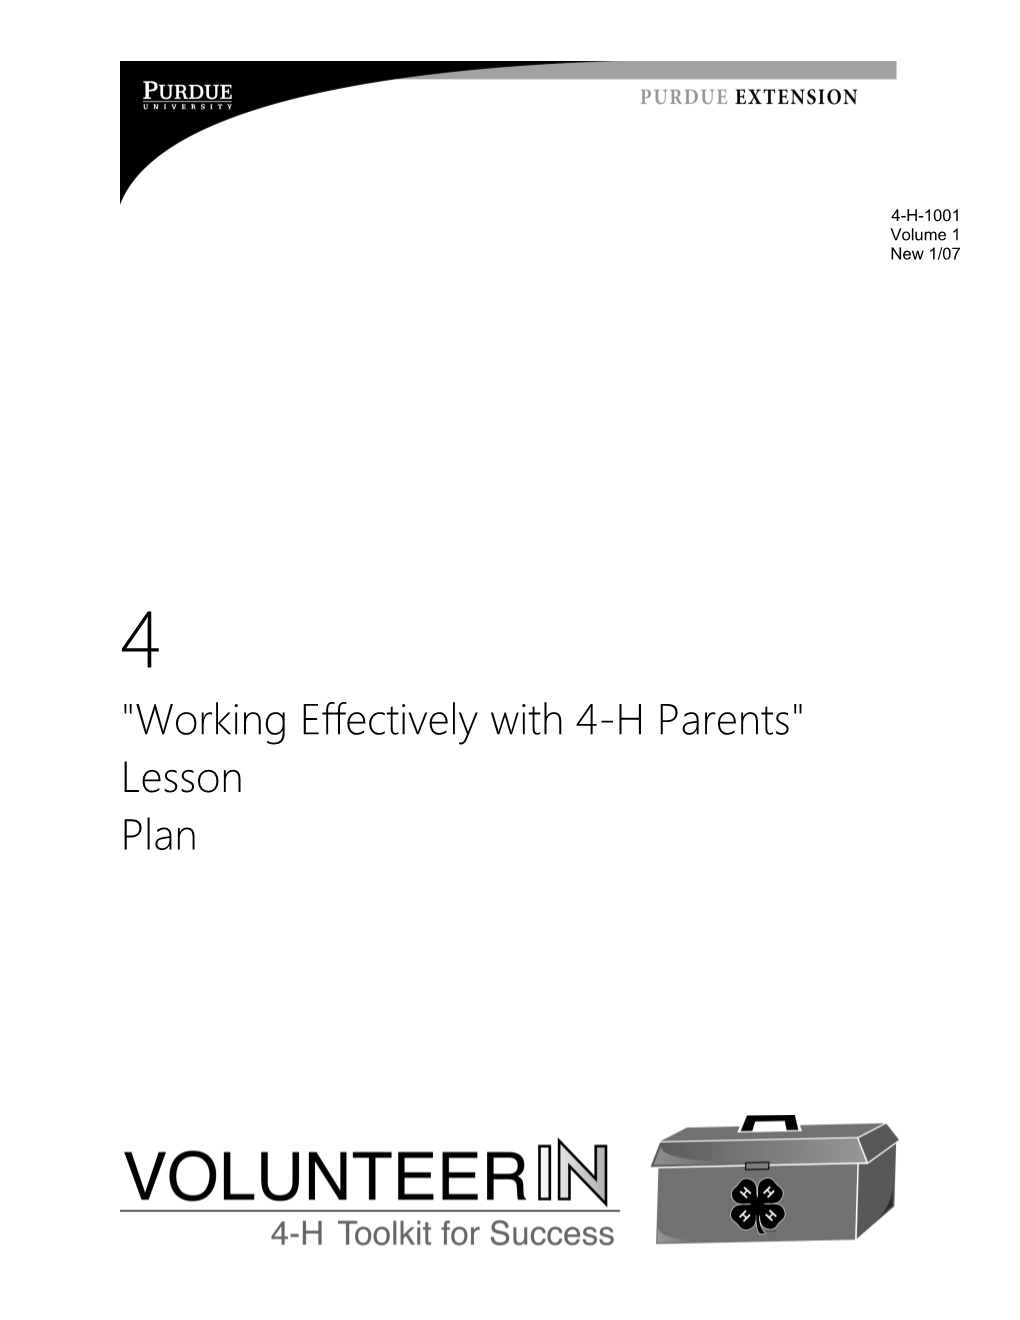 Working Effectively with 4-H Parents